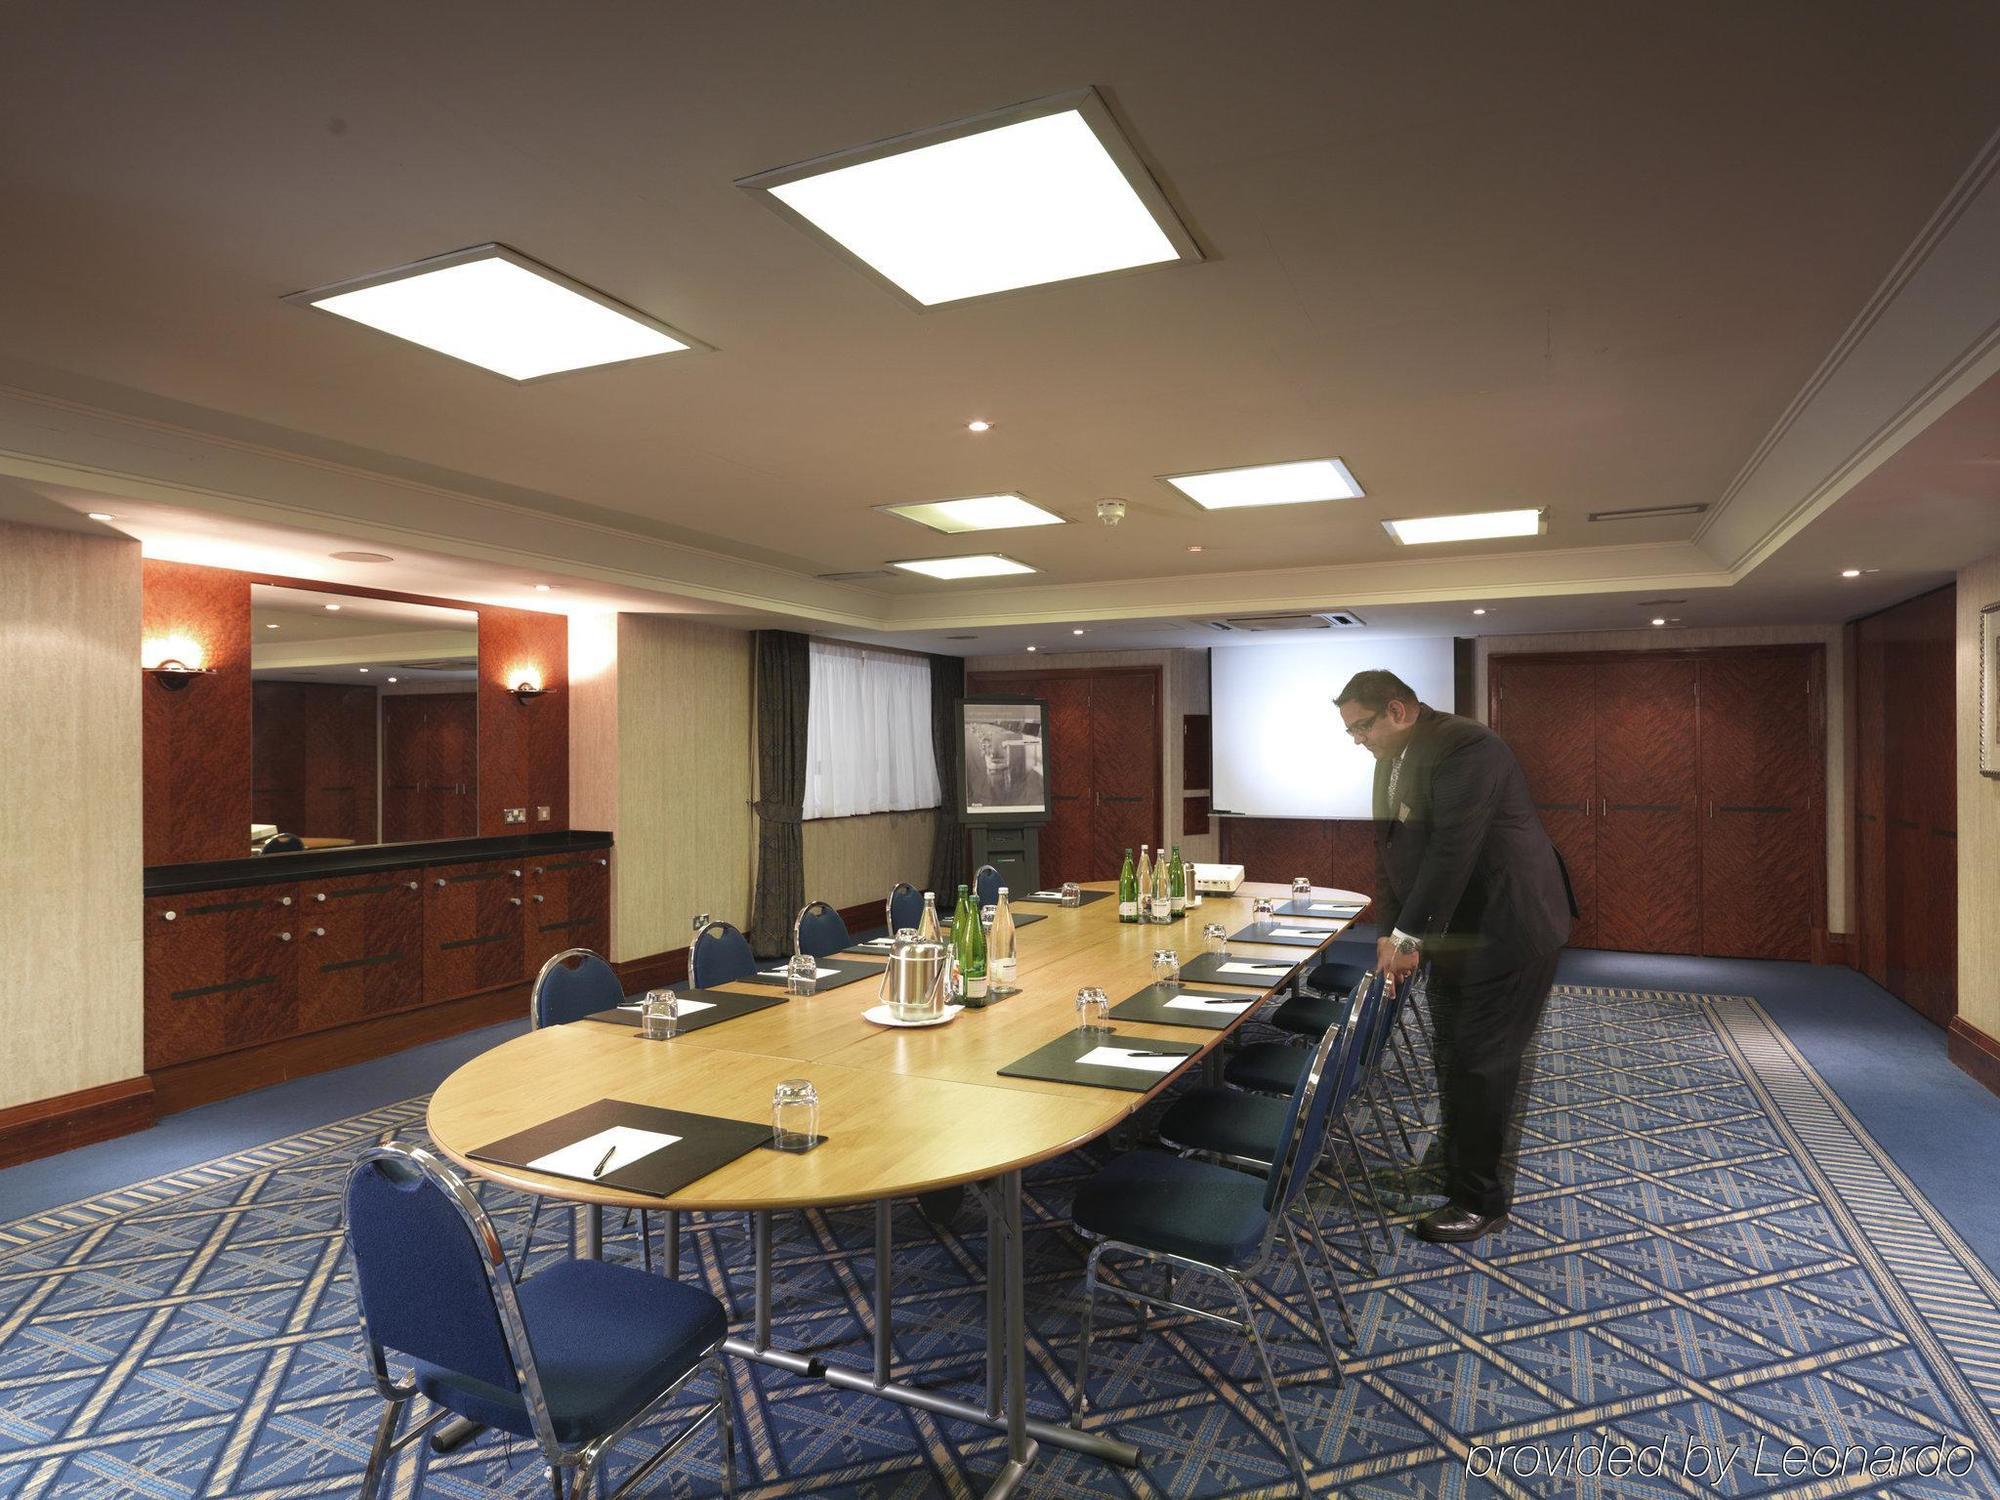 Conference room hire has never been easier than with us